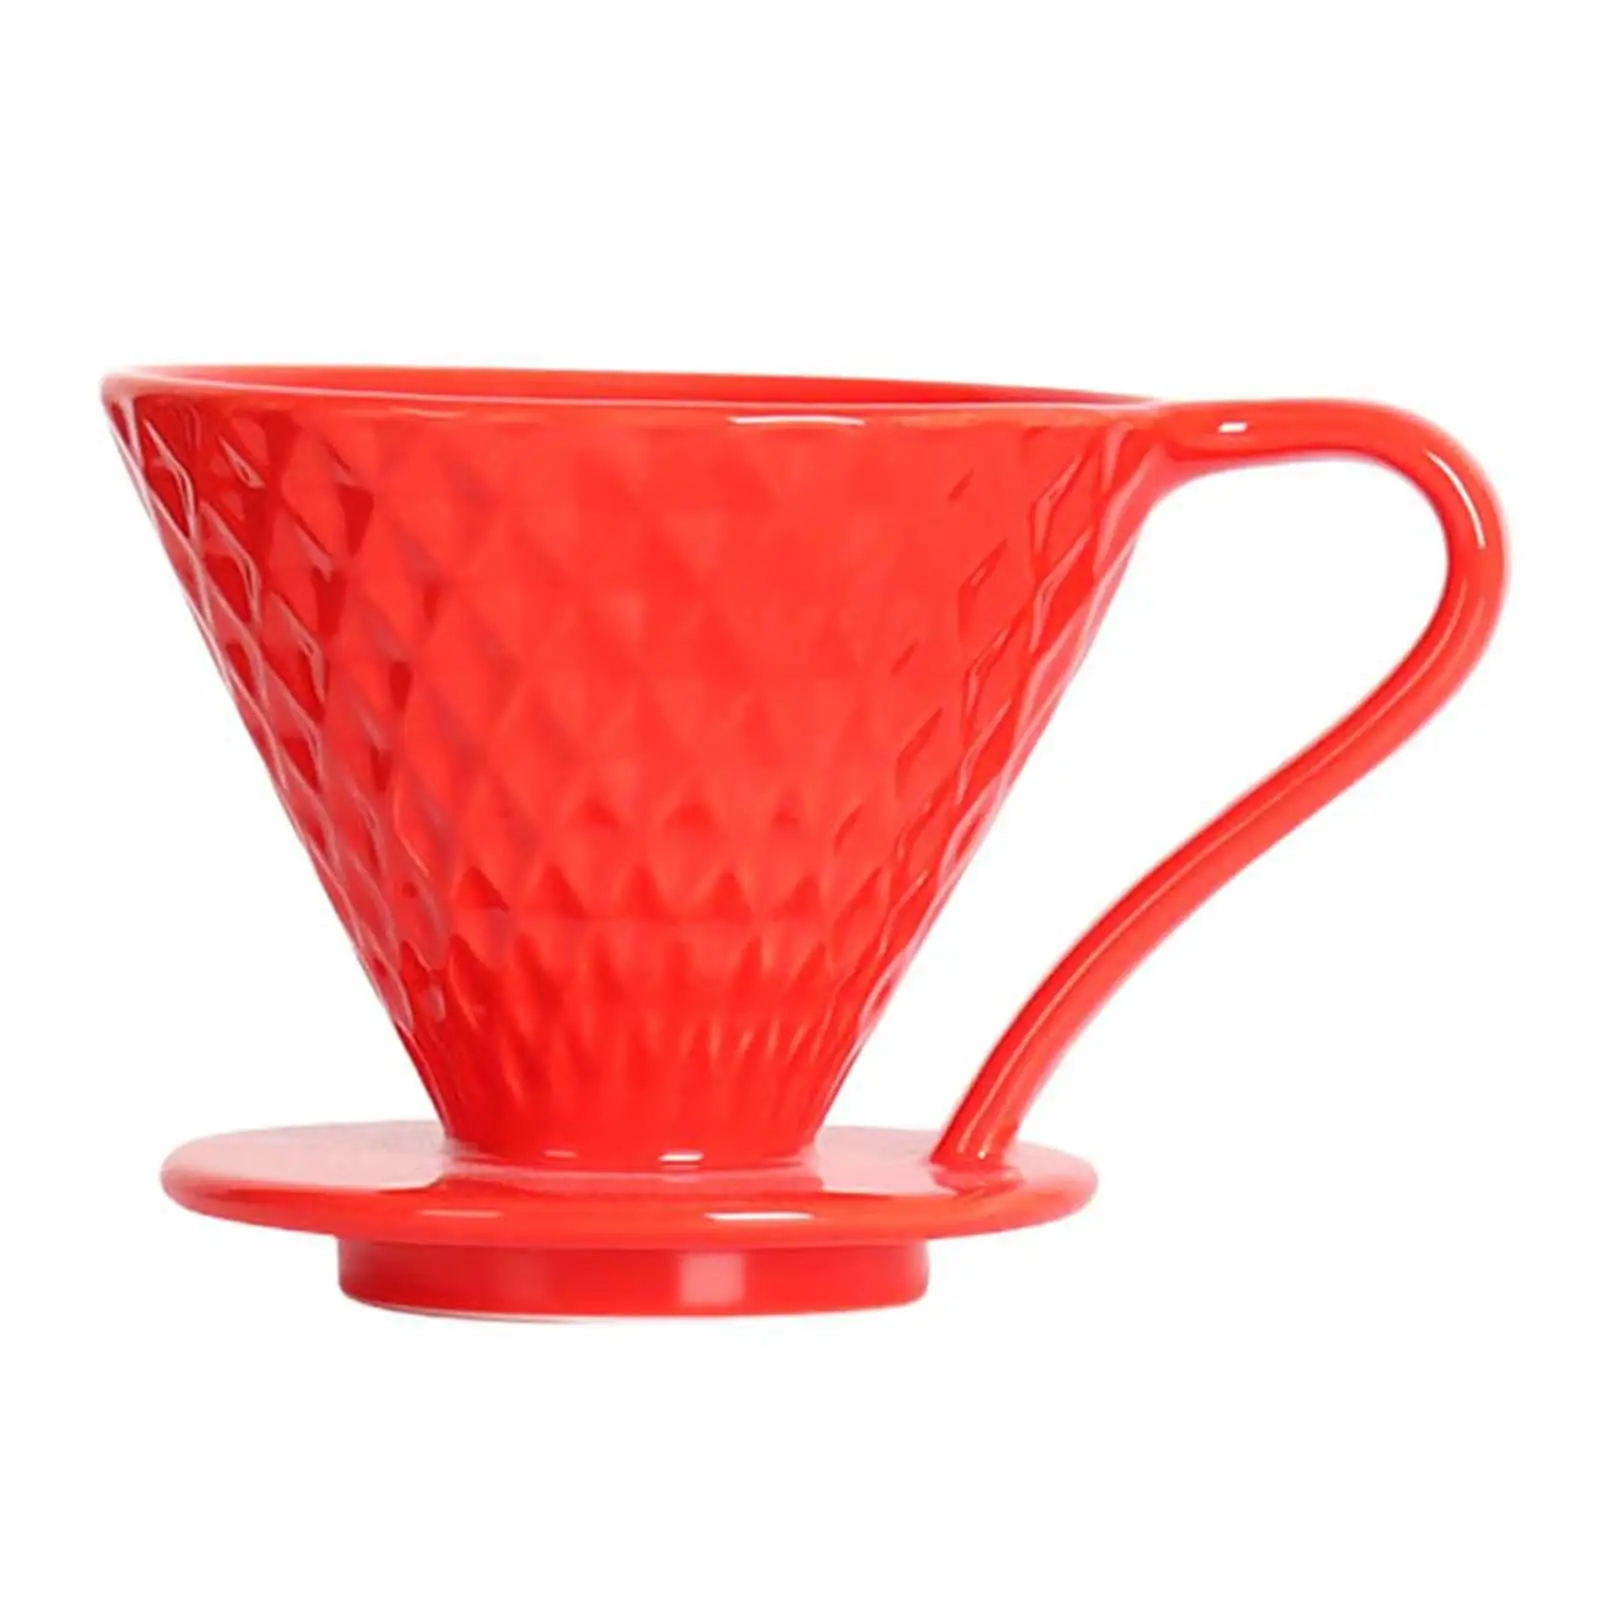 Coffee Filter Coffee Filters Ceramic Reusable Durable Pour over Coffee Filter Coffee Filter for Office Home